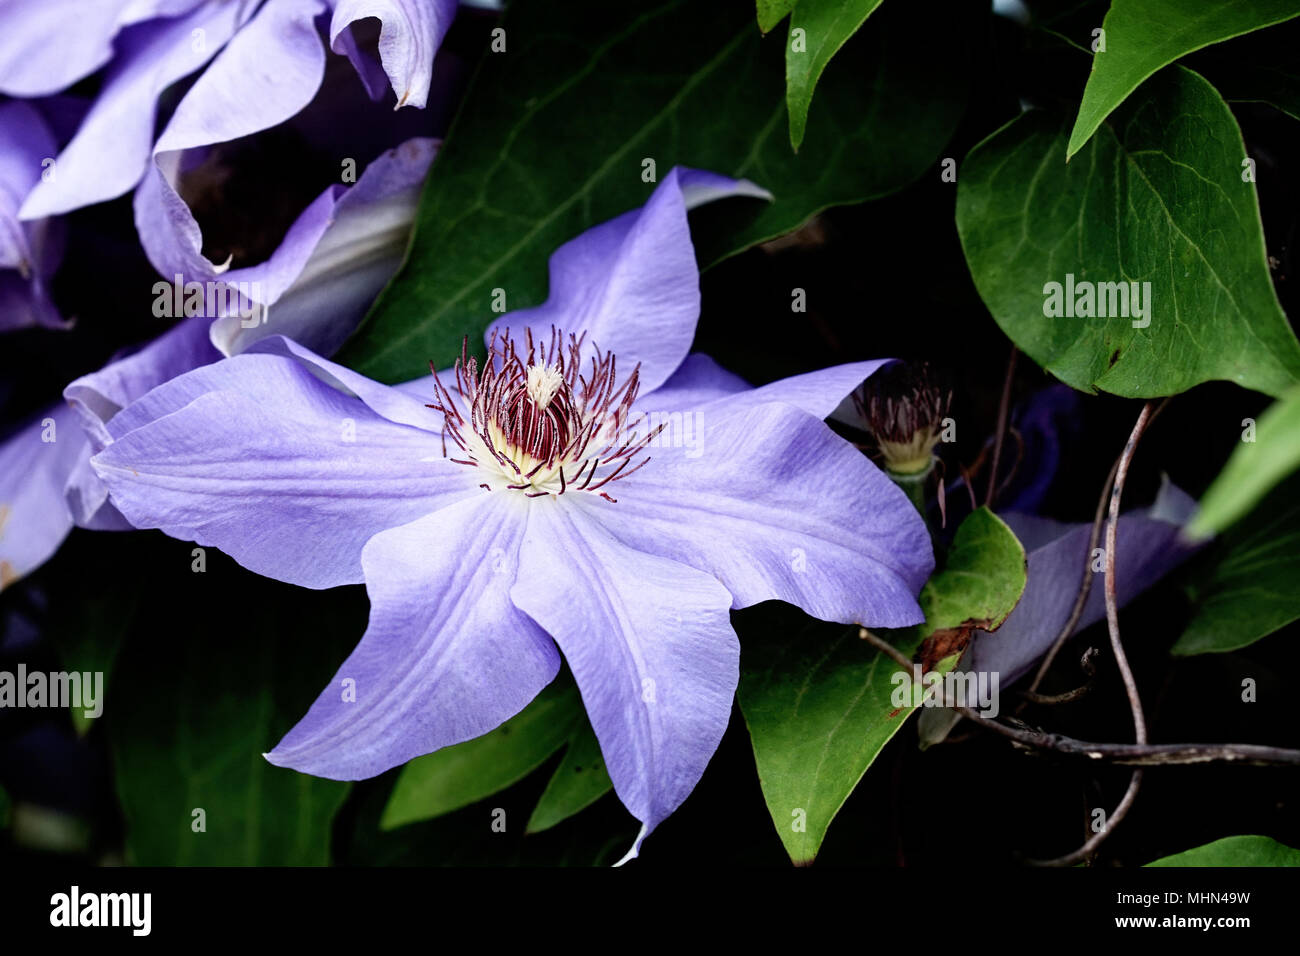 Macro of a violet clematis with extreme shallow depth of field. Stock Photo